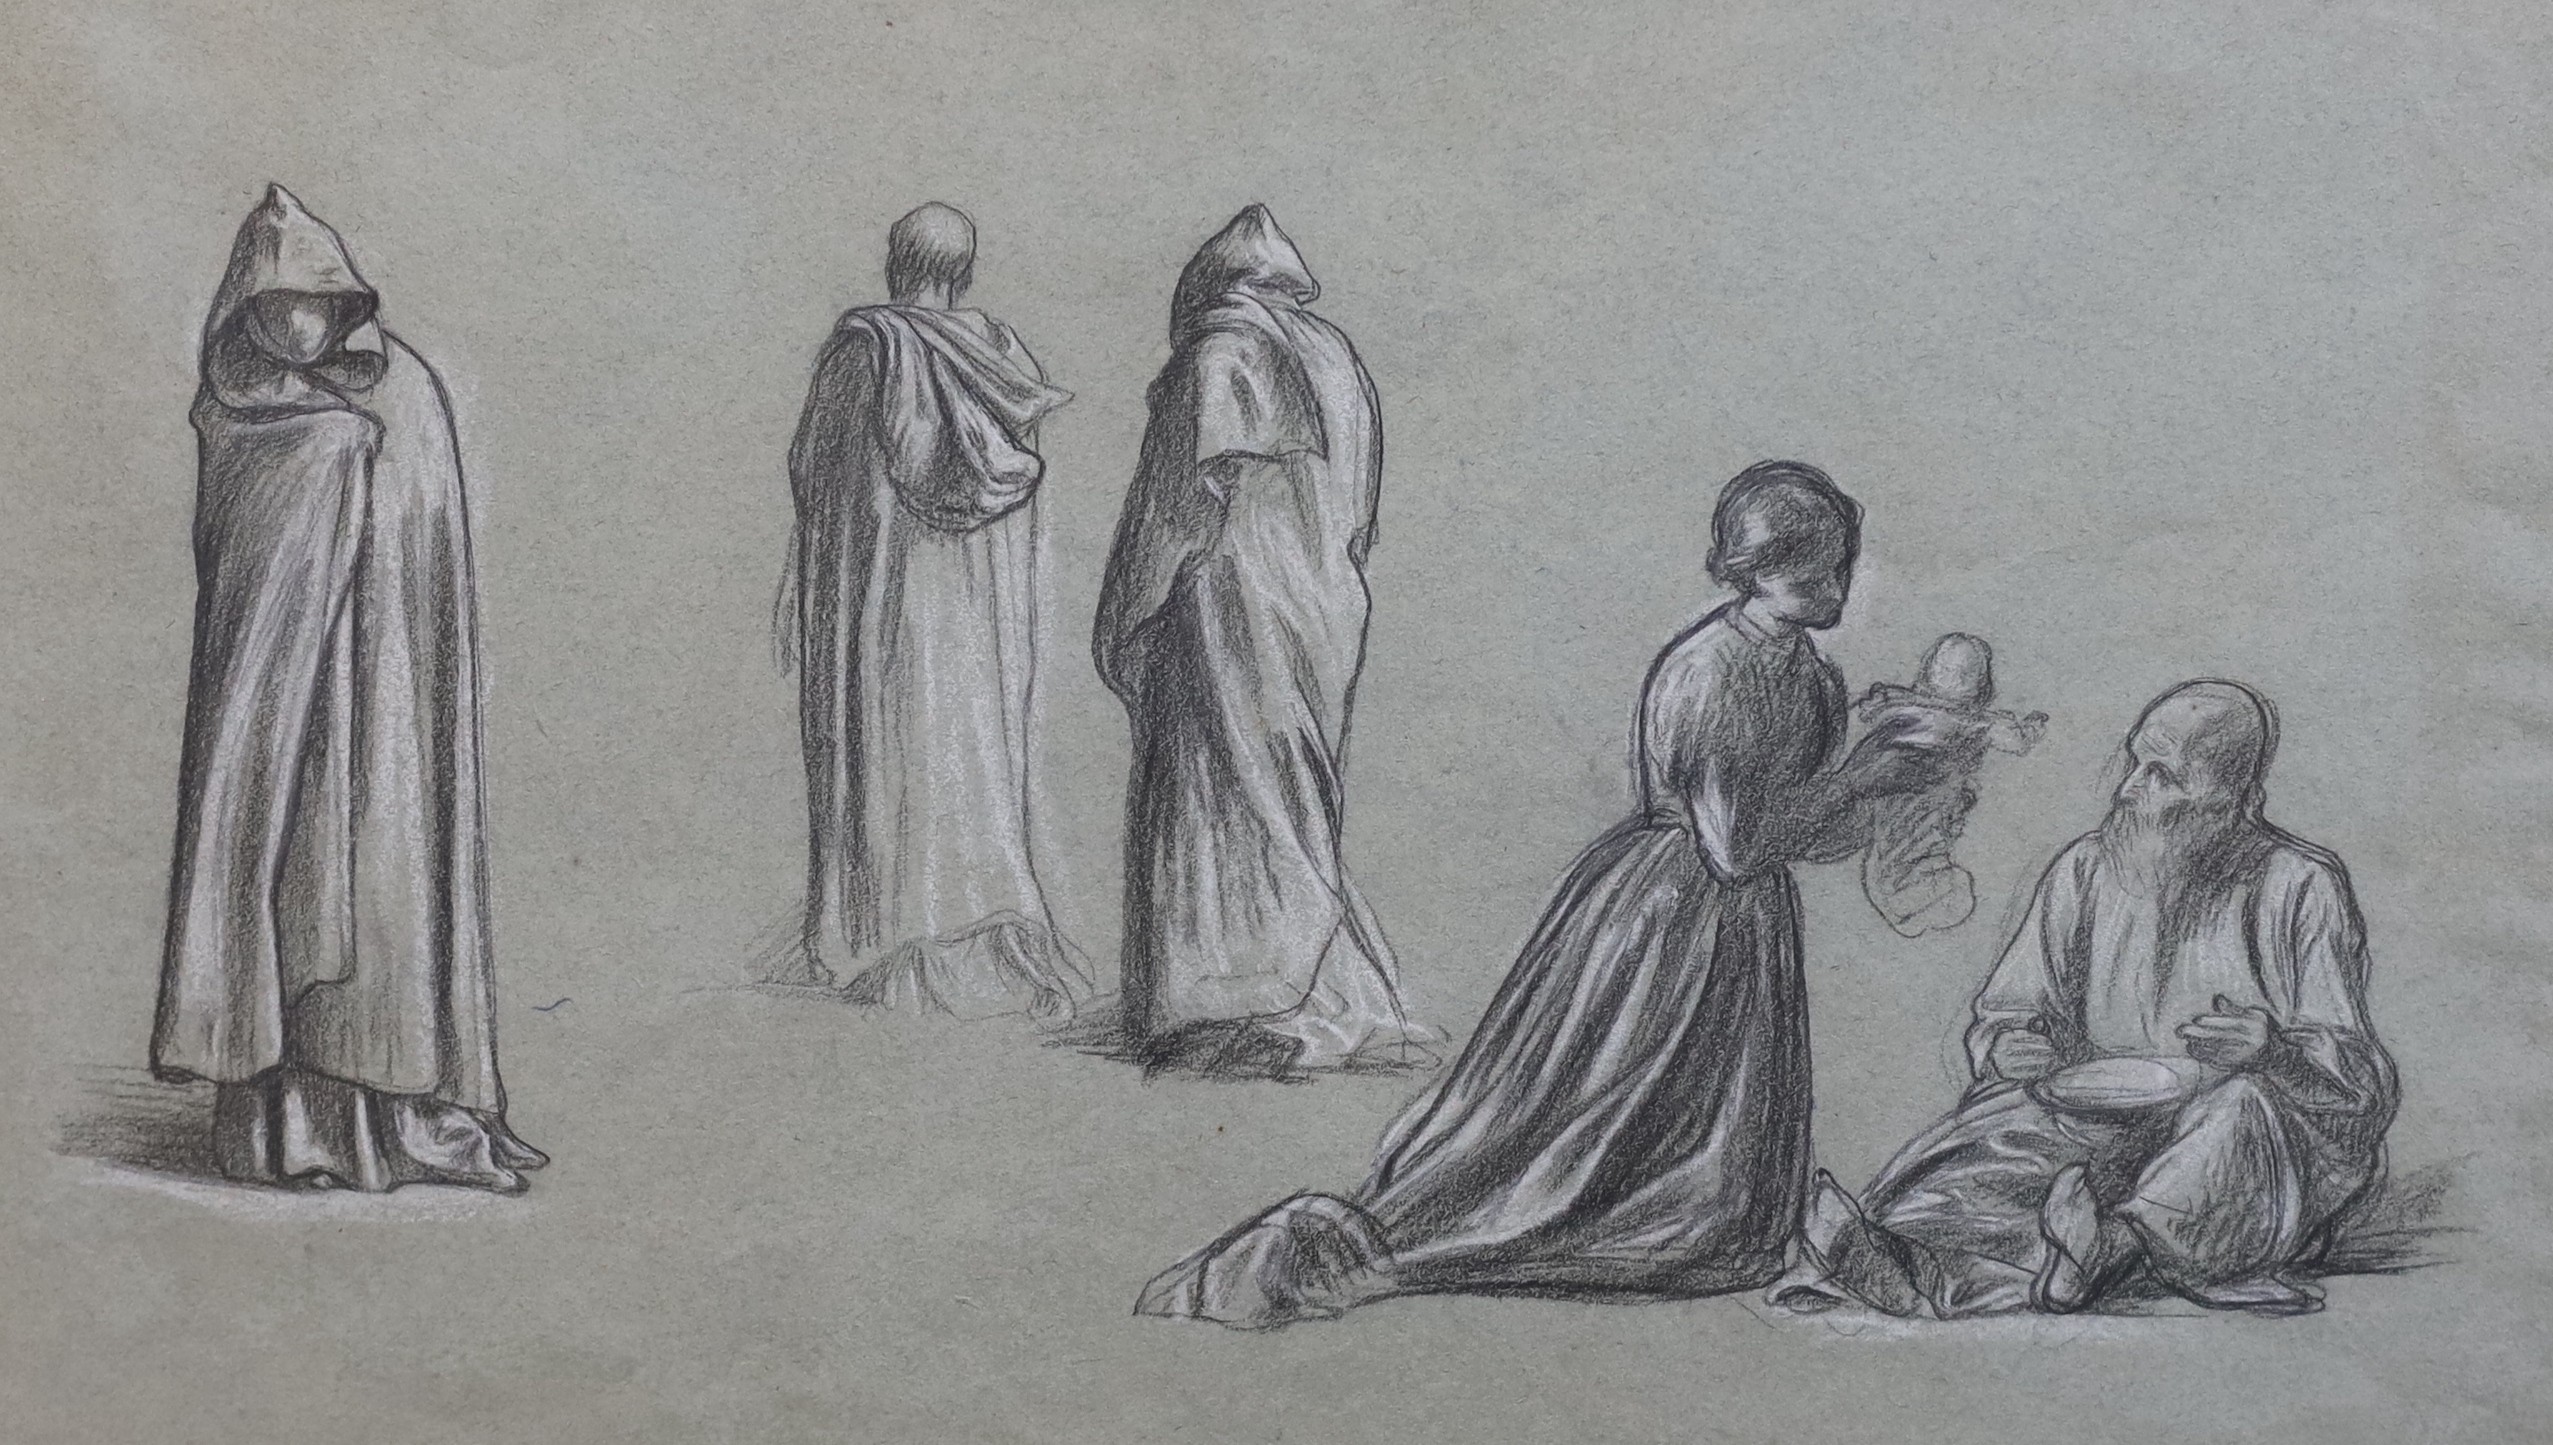 Lord Frederic Leighton, P.R.A. (British, 1830-1896), Studies for Romola, pencil and white chalk on light grey paper, 24 x 40.5cm                                                                                            